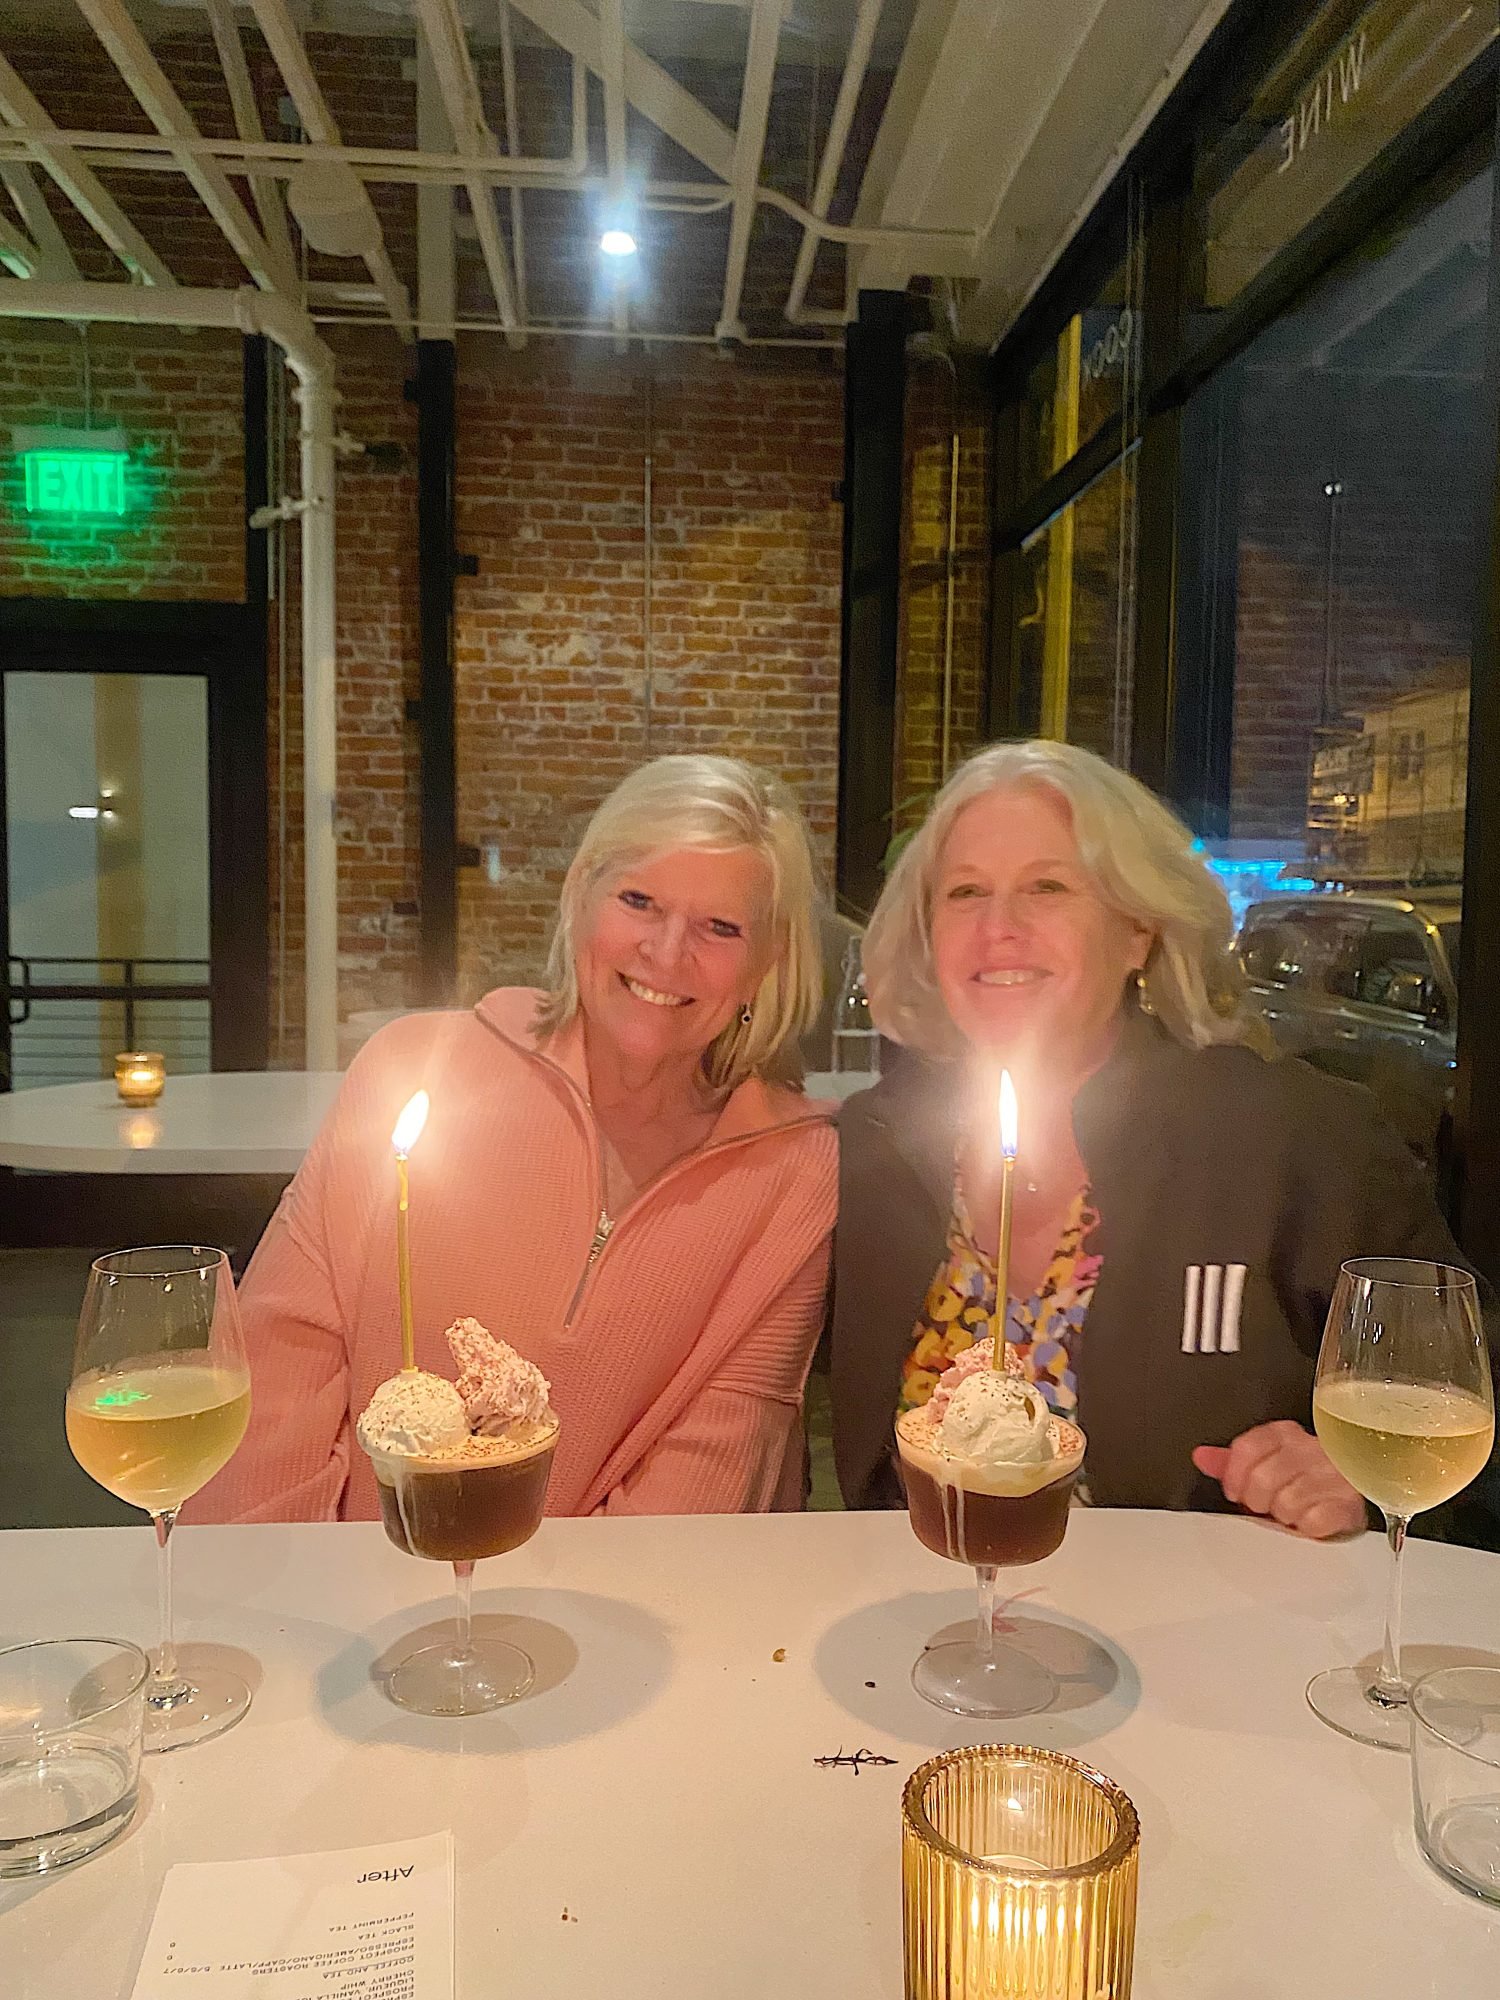 Two women smiling while sitting at a table with three glasses of wine and two dessert cups with lit candles in a dimly lit restaurant.